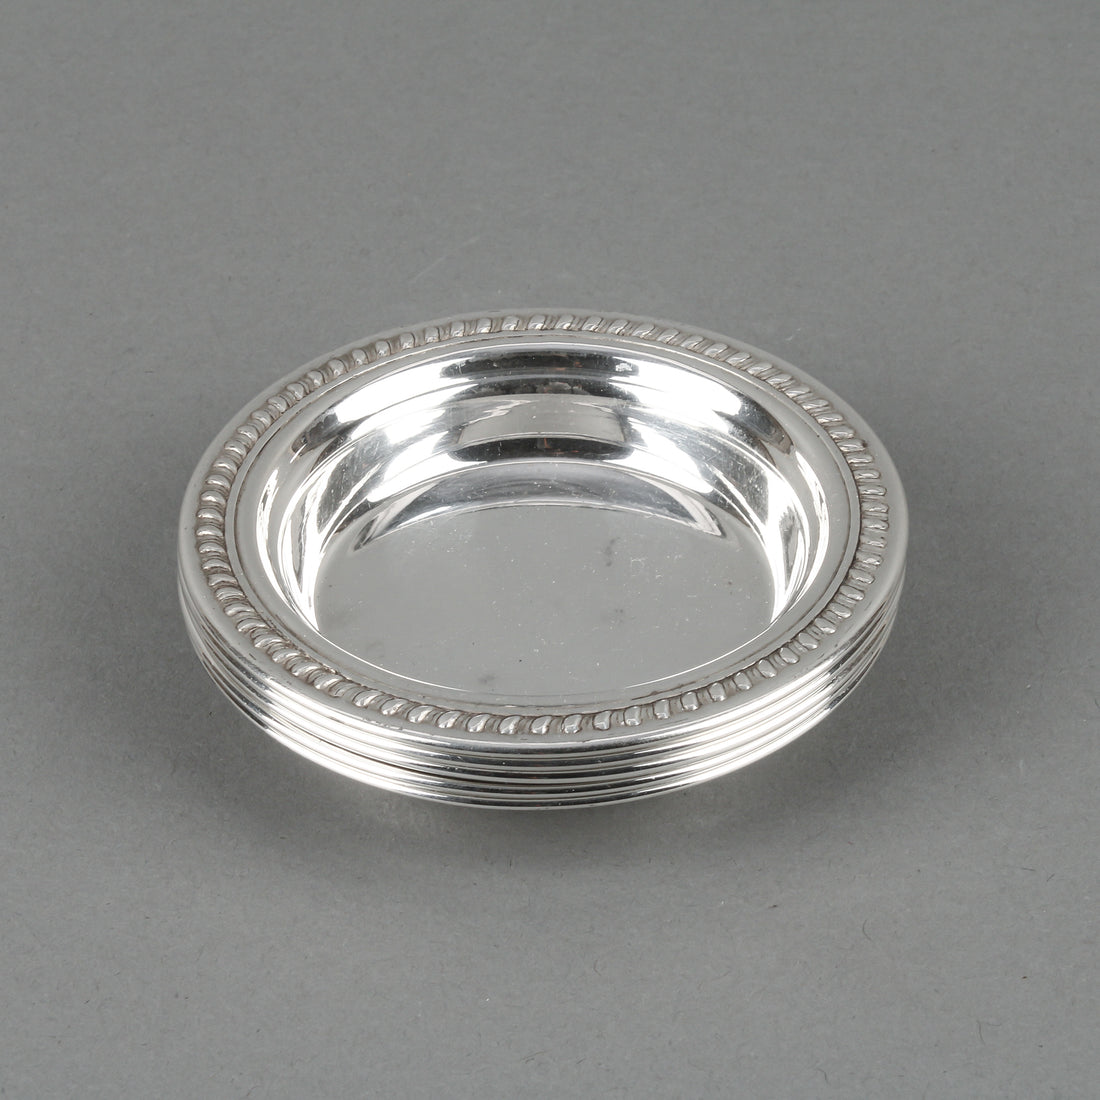 INTERNATIONAL Sterling Silver Nut Dishes - Set of 5